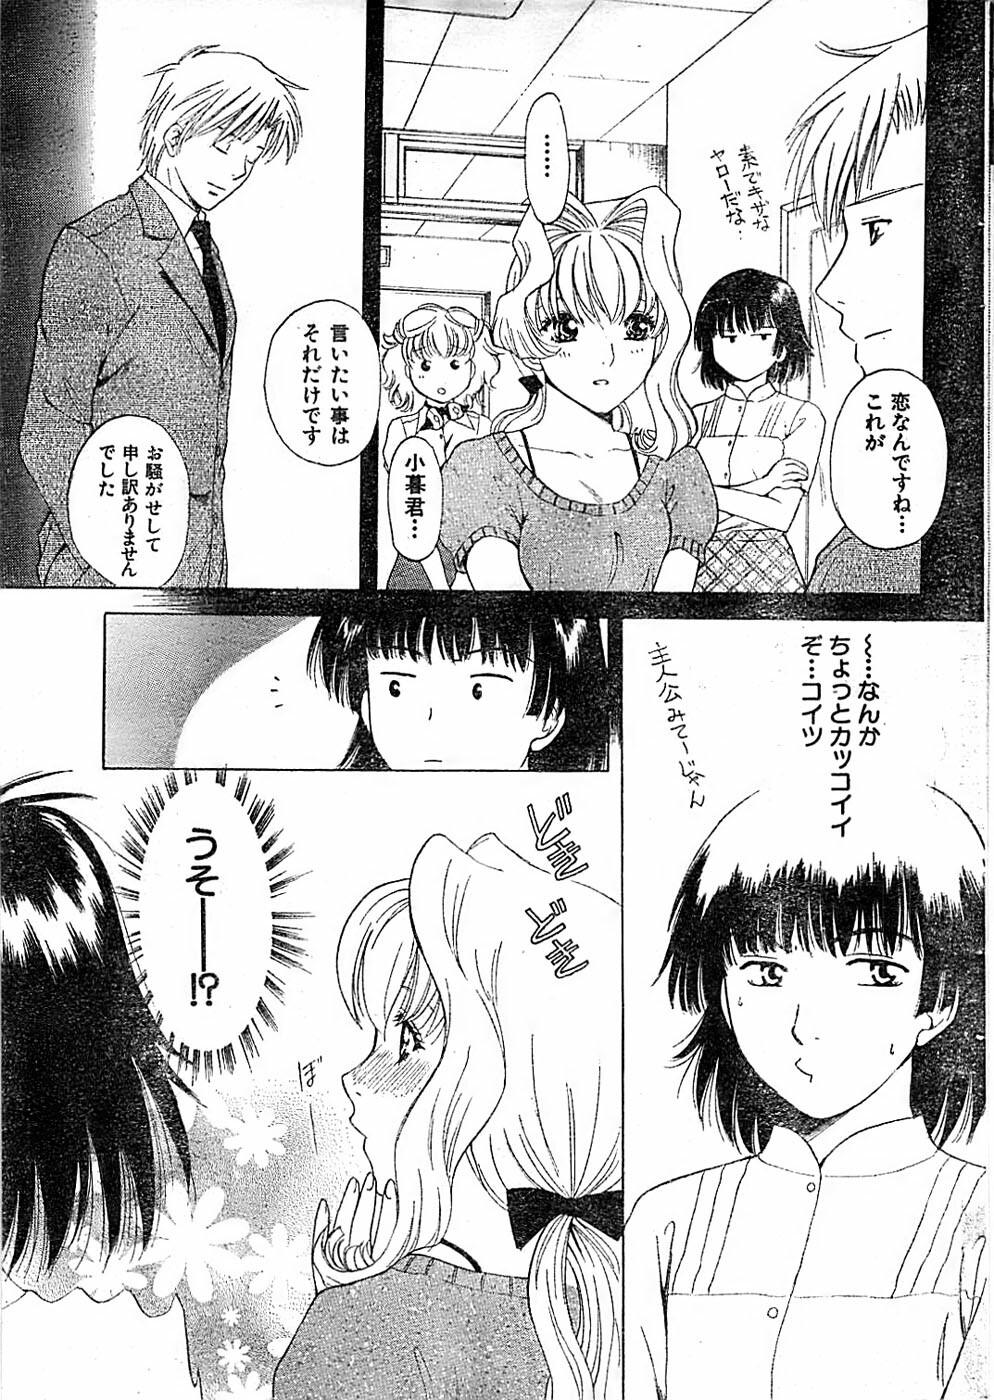 Doki! Special 2006-04 page 17 full